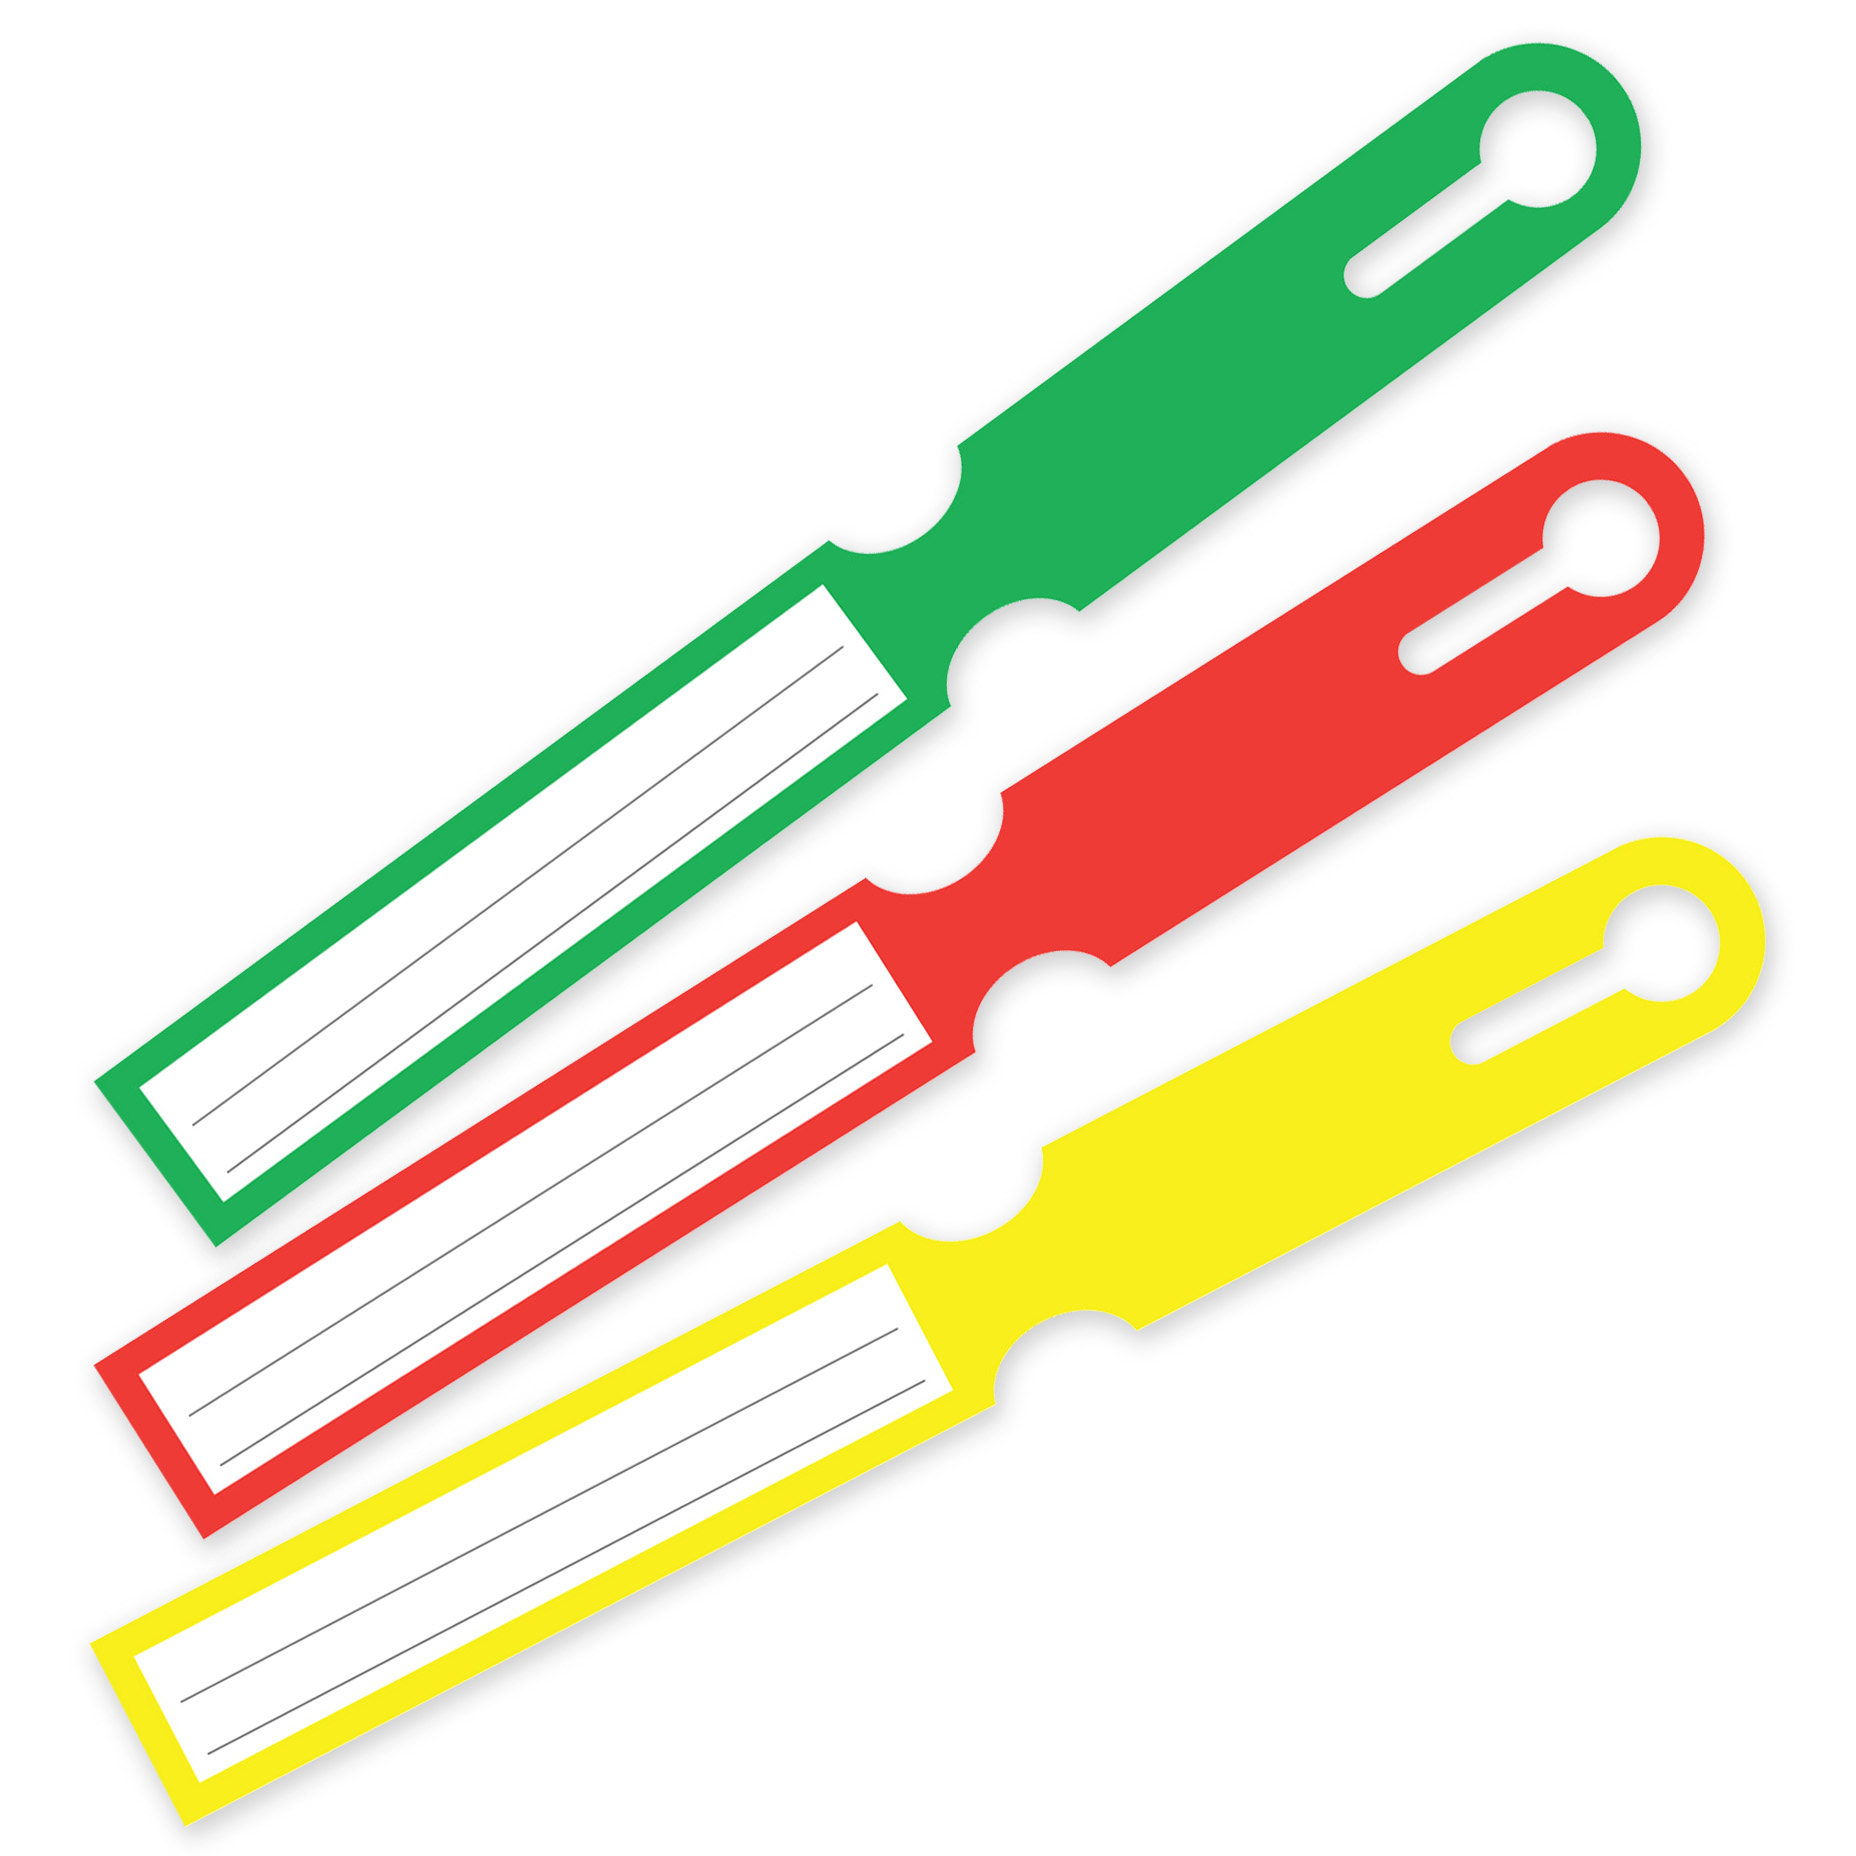 Label 286x32 mm with writing lines in green, yellow, red and white